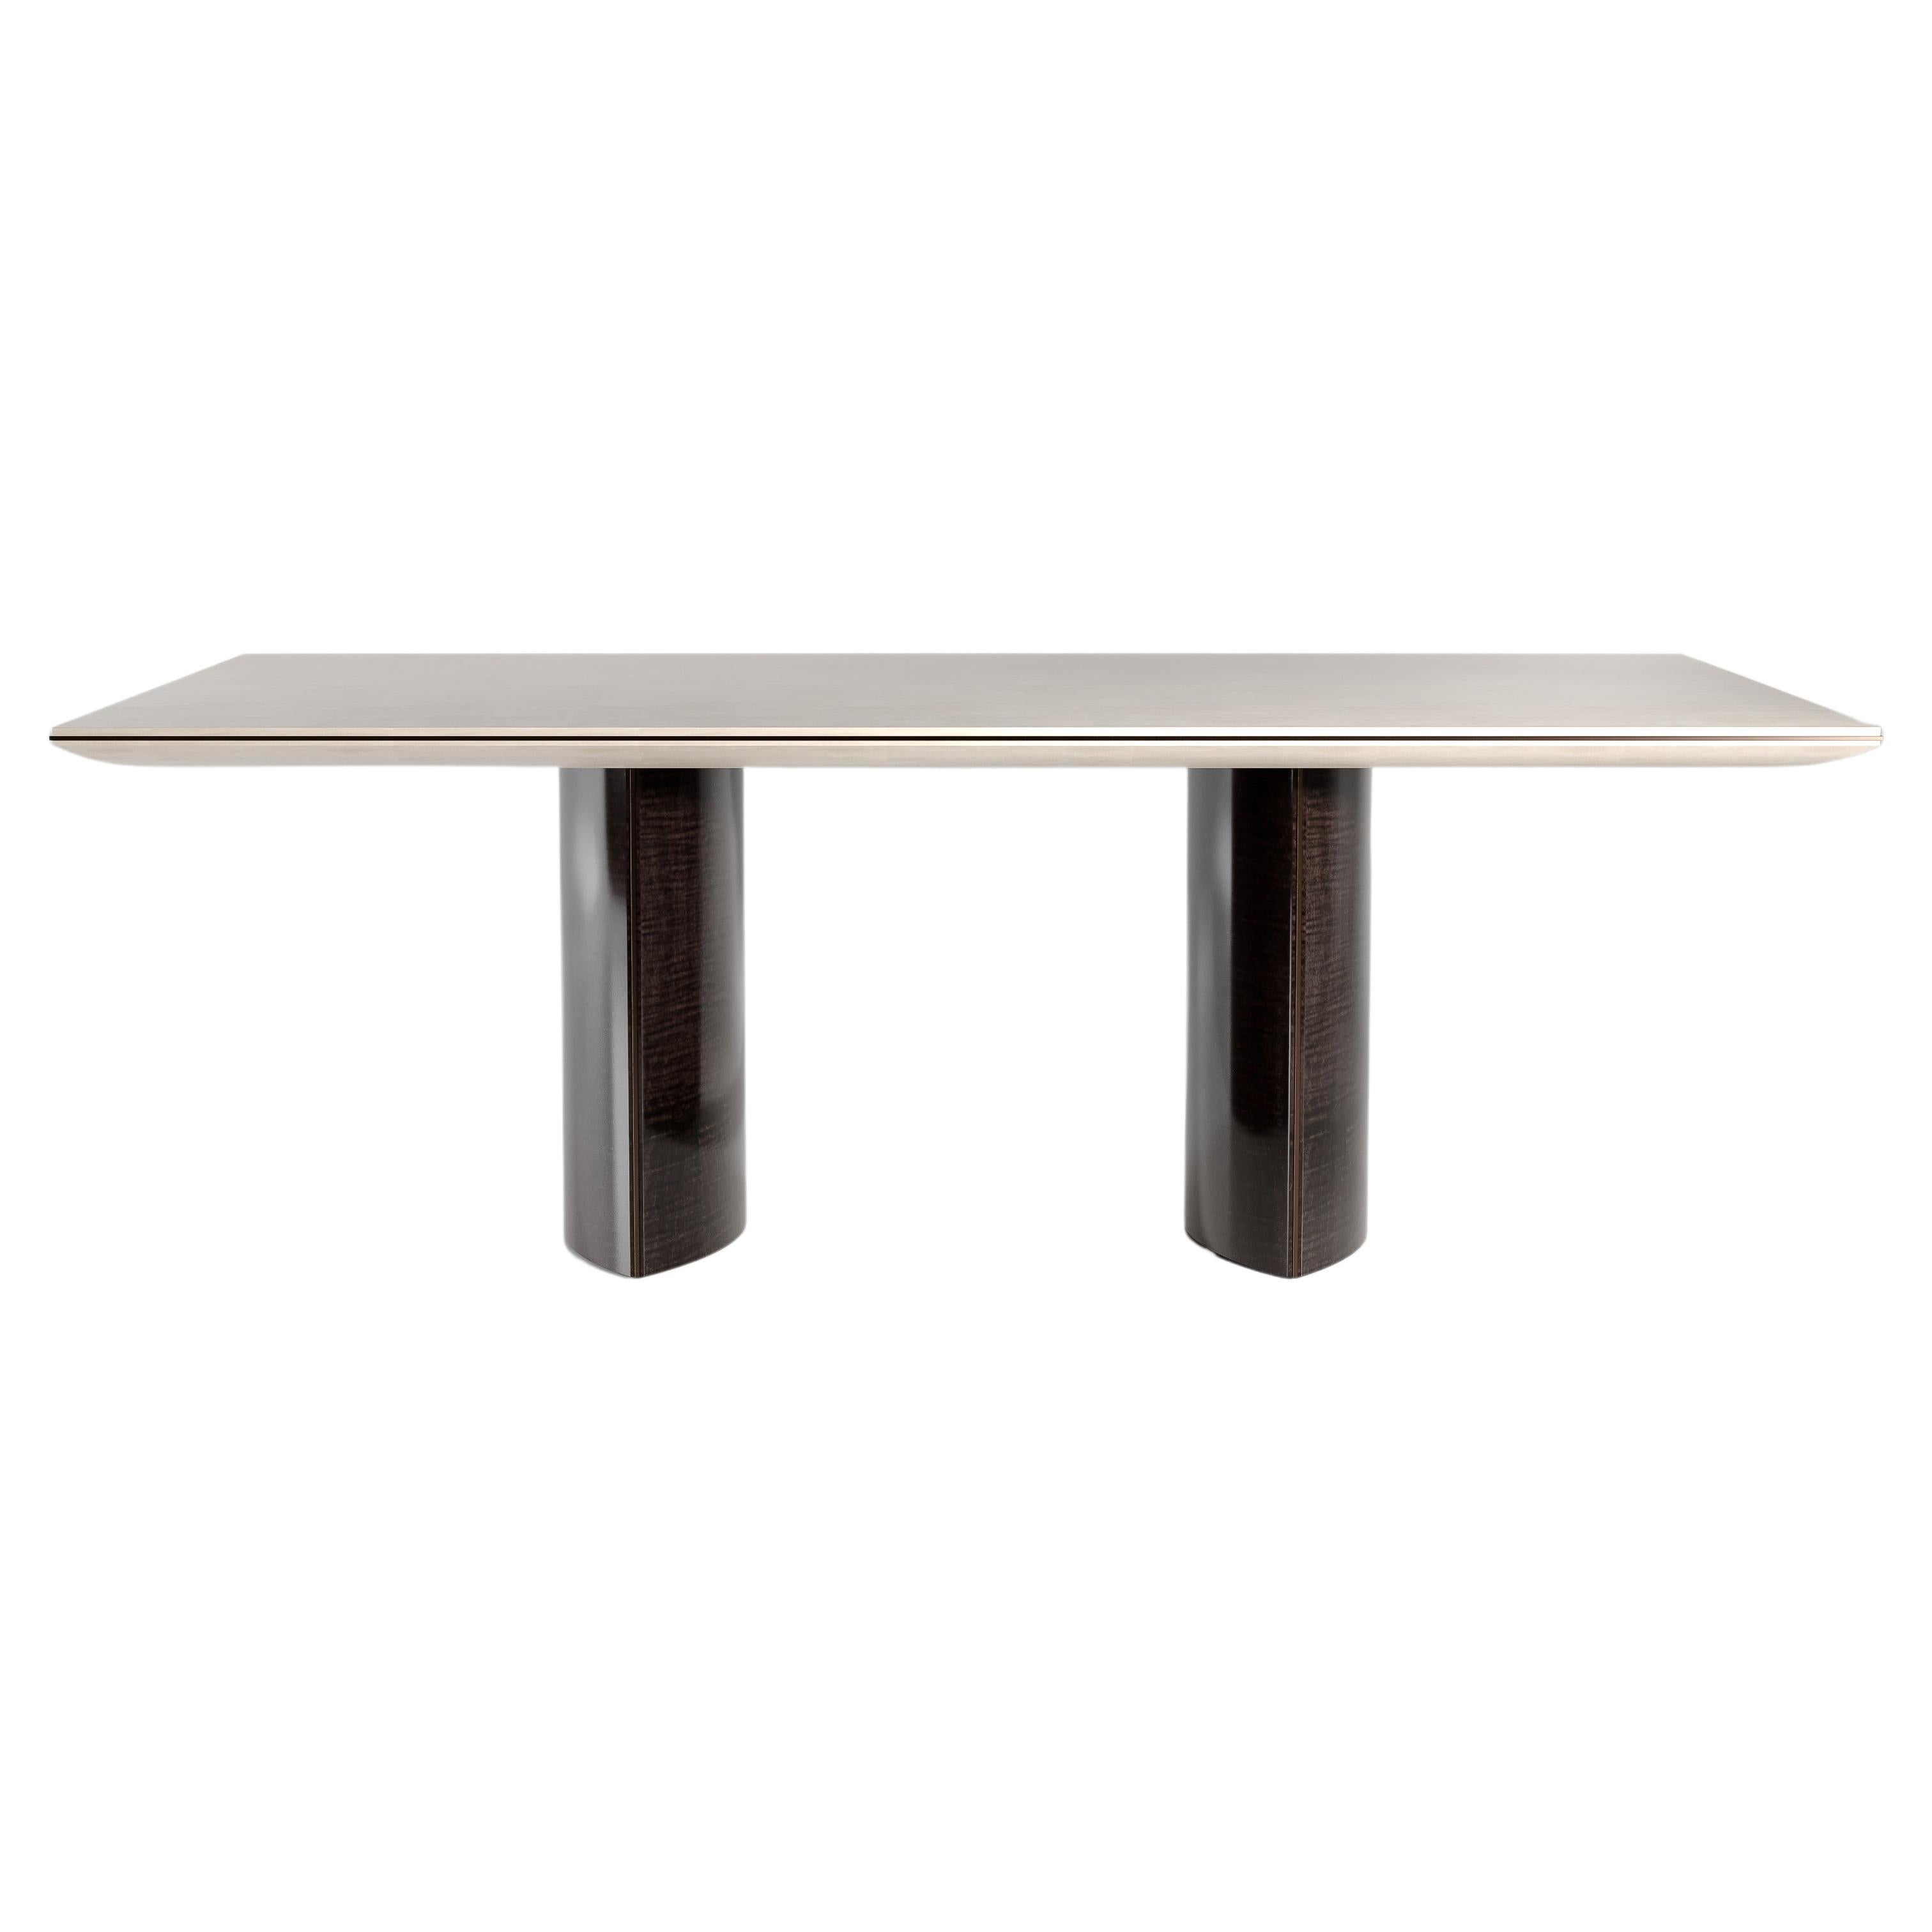 Two-Tone Sycamore Wood Modern Dining Table with Pedestals